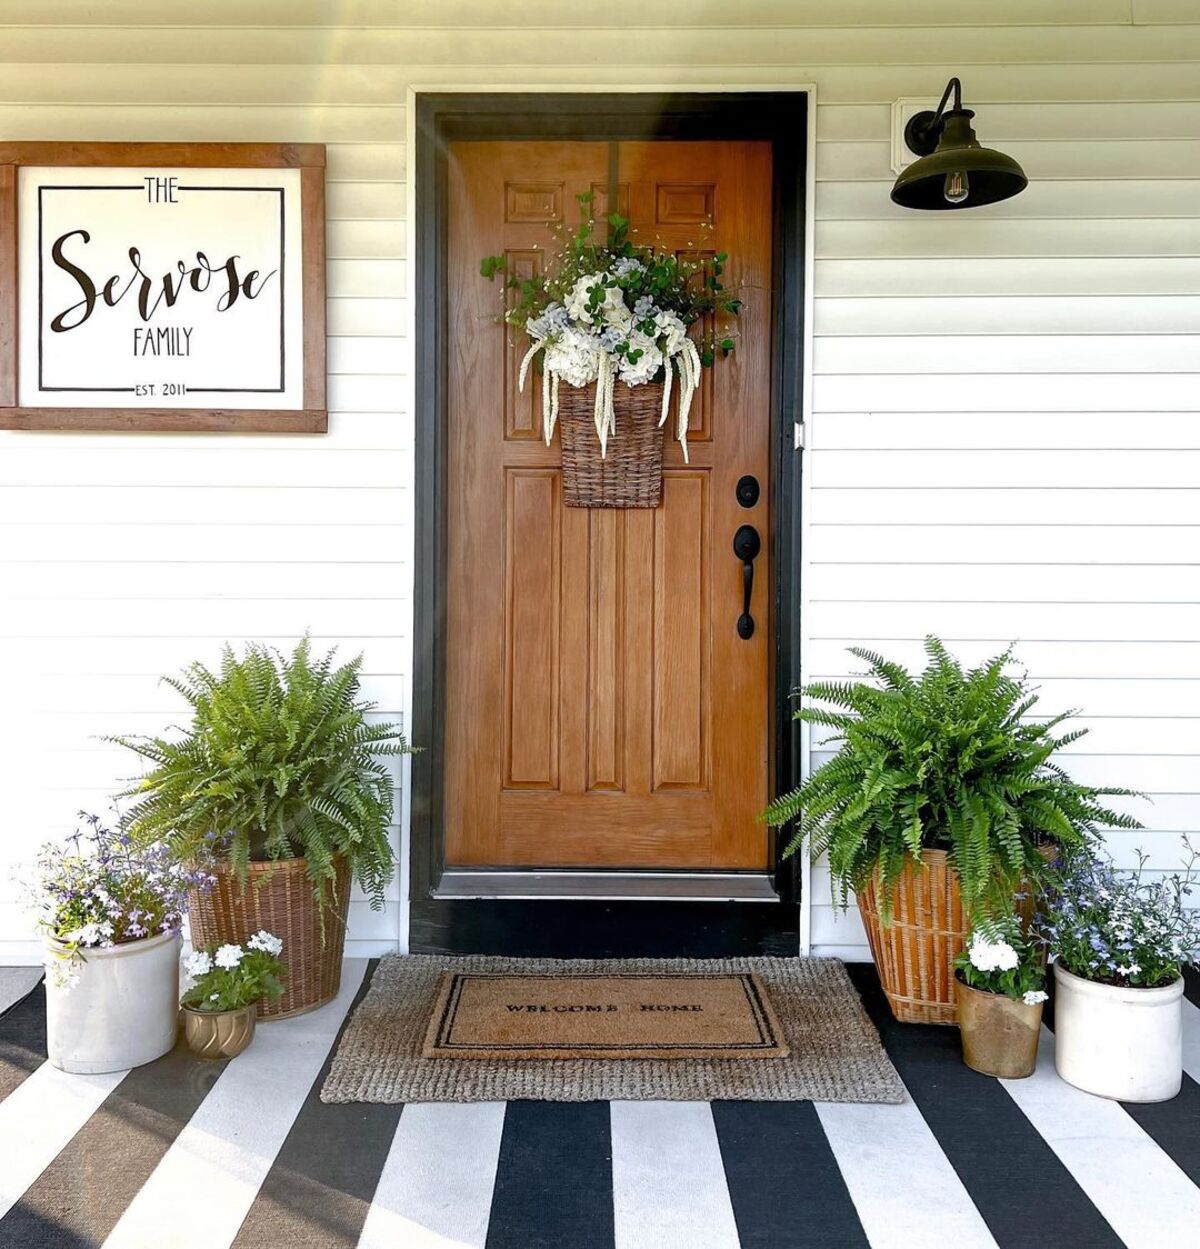 20 Stunning Front Porch Flower Pots to Enhance Your Home’s Curb Appeal